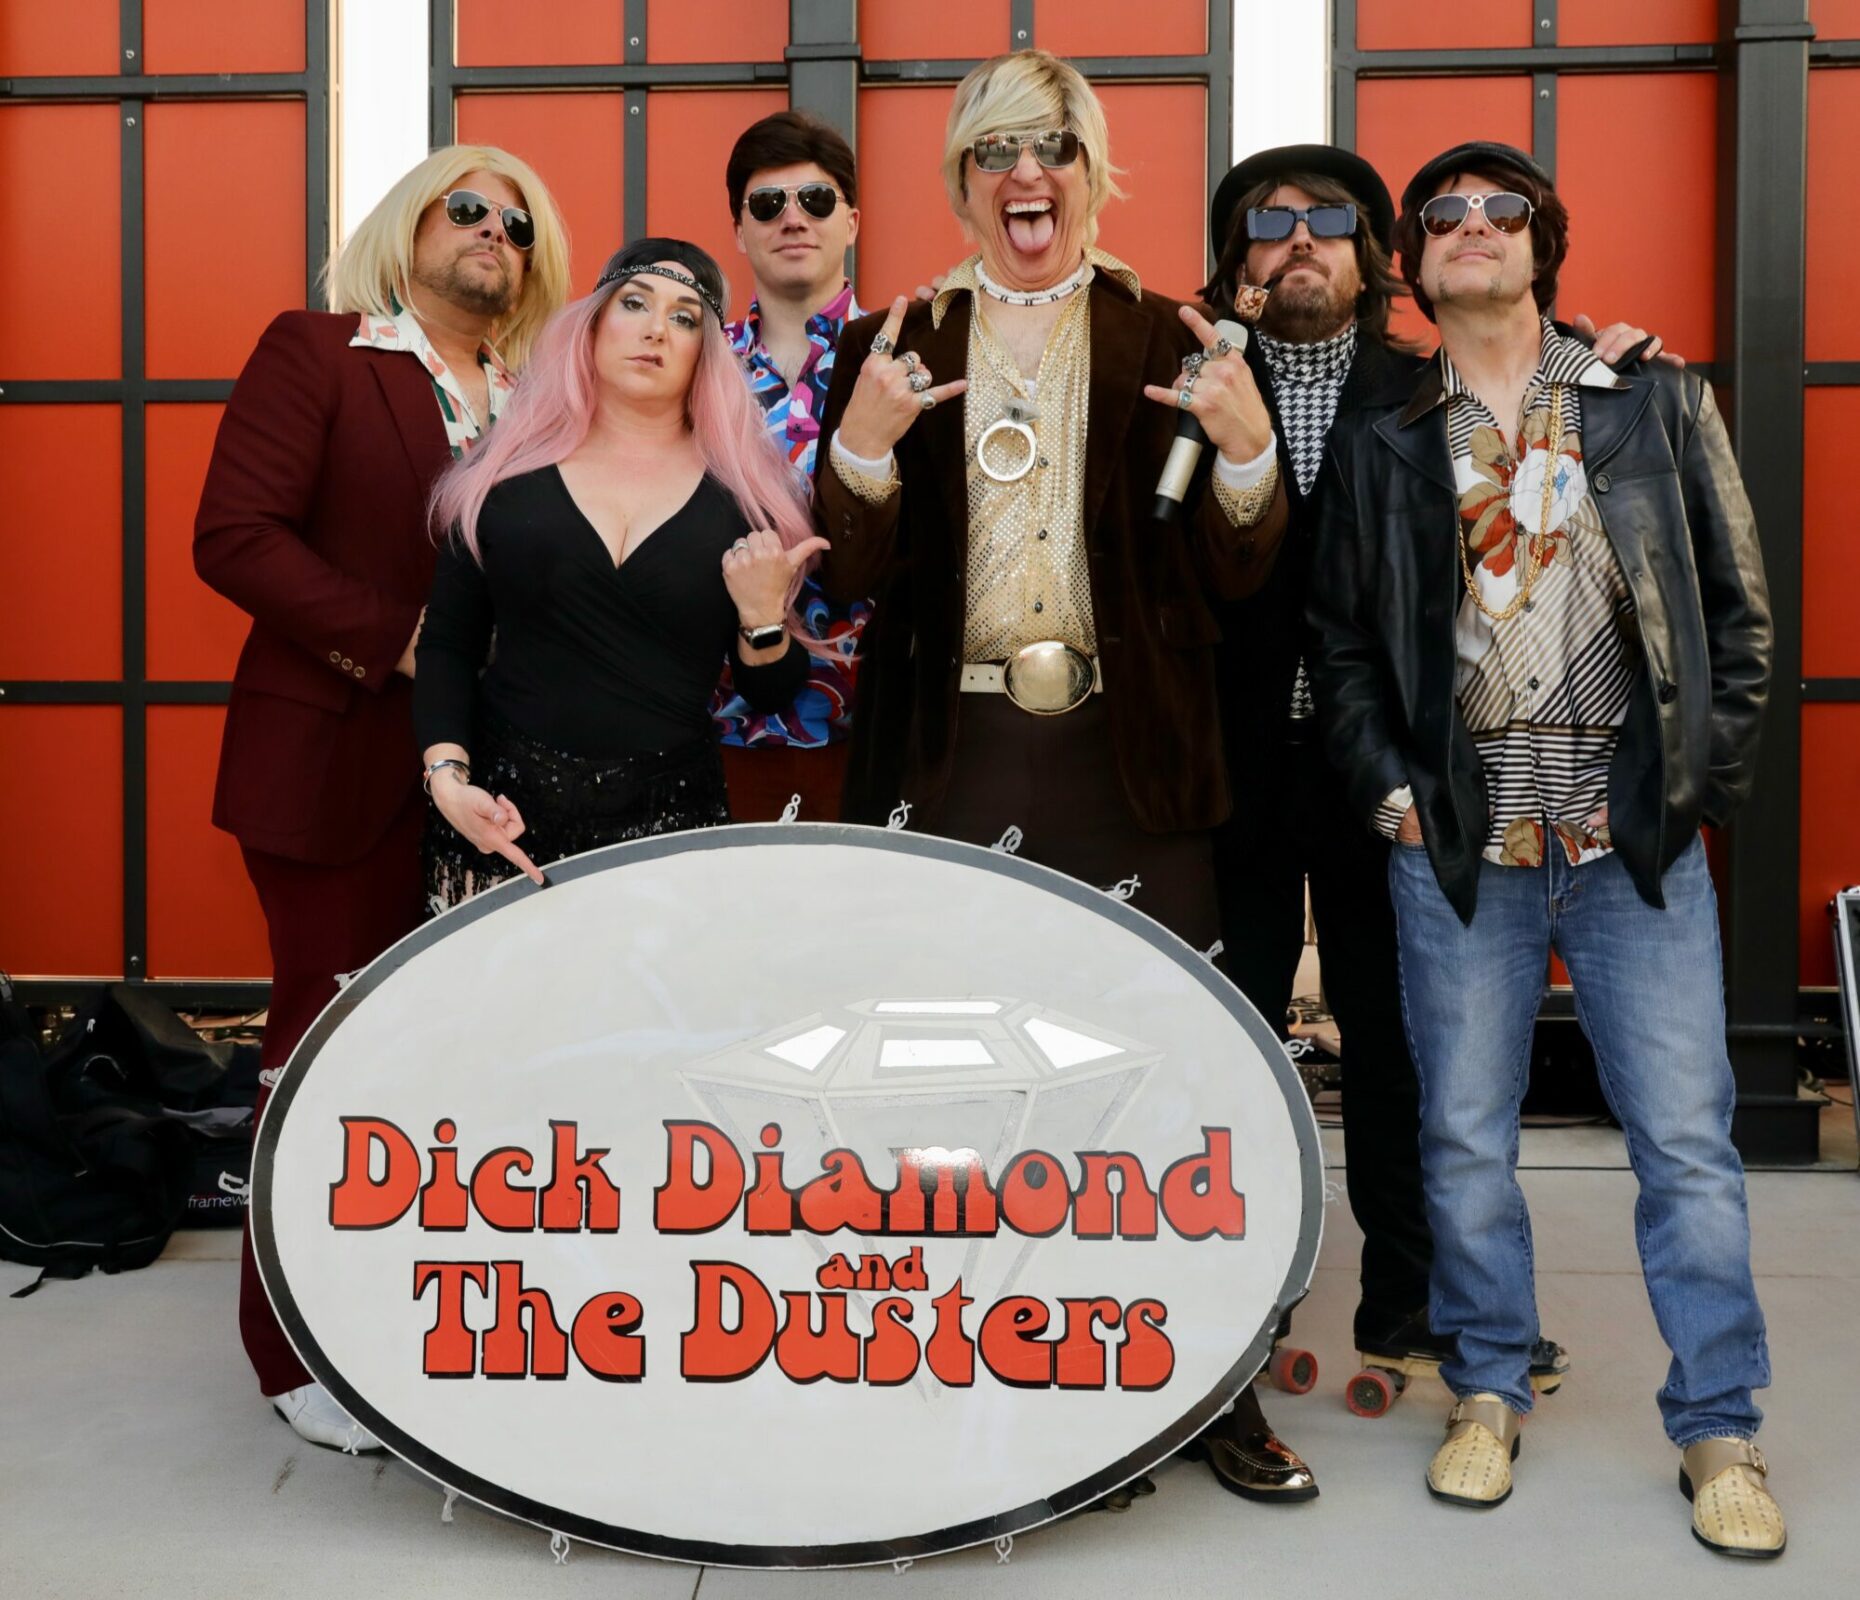 dick diamond and the dusters